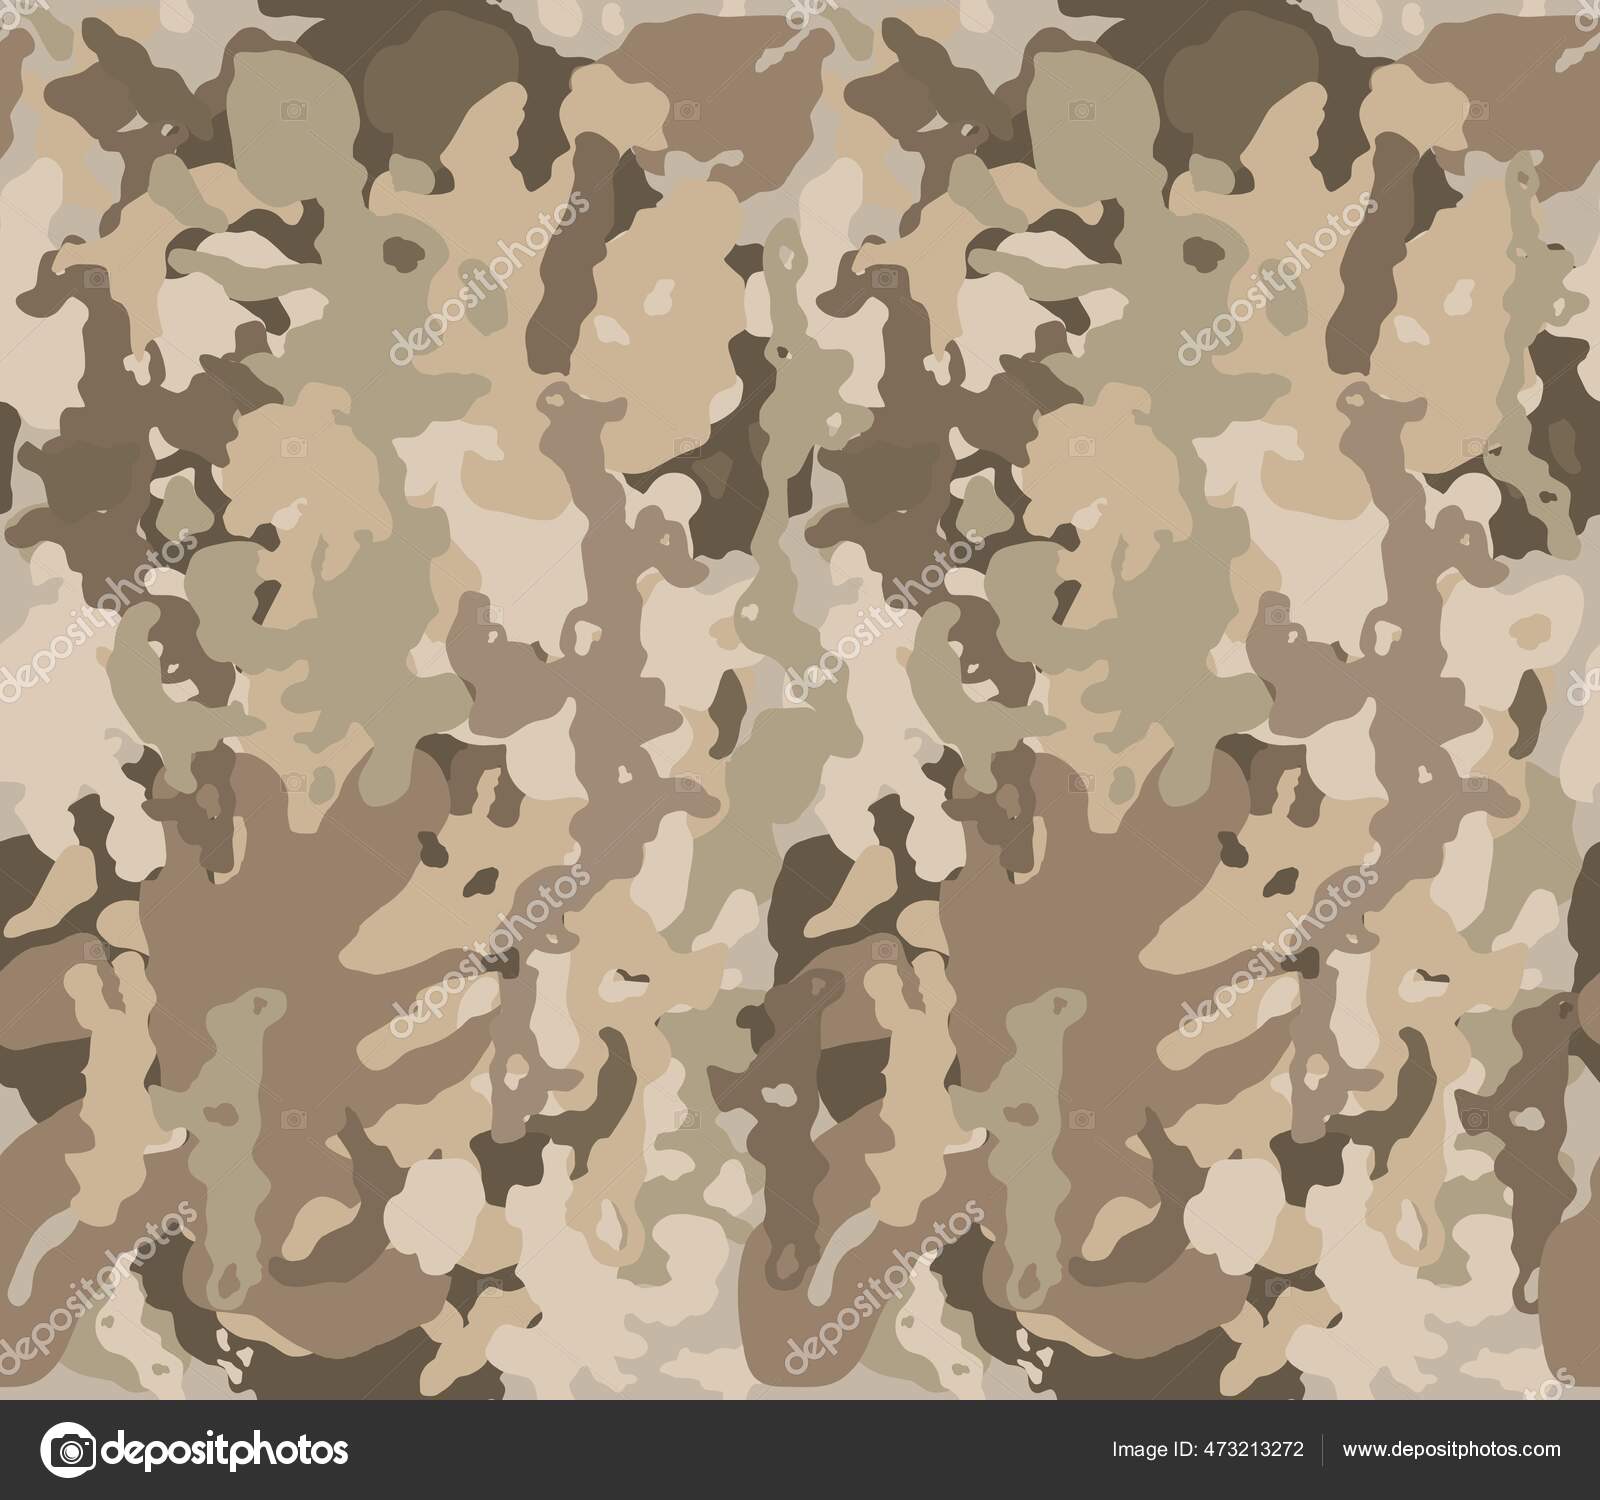 Texture Military Camouflage Seamless Desert Camouflage Pattern